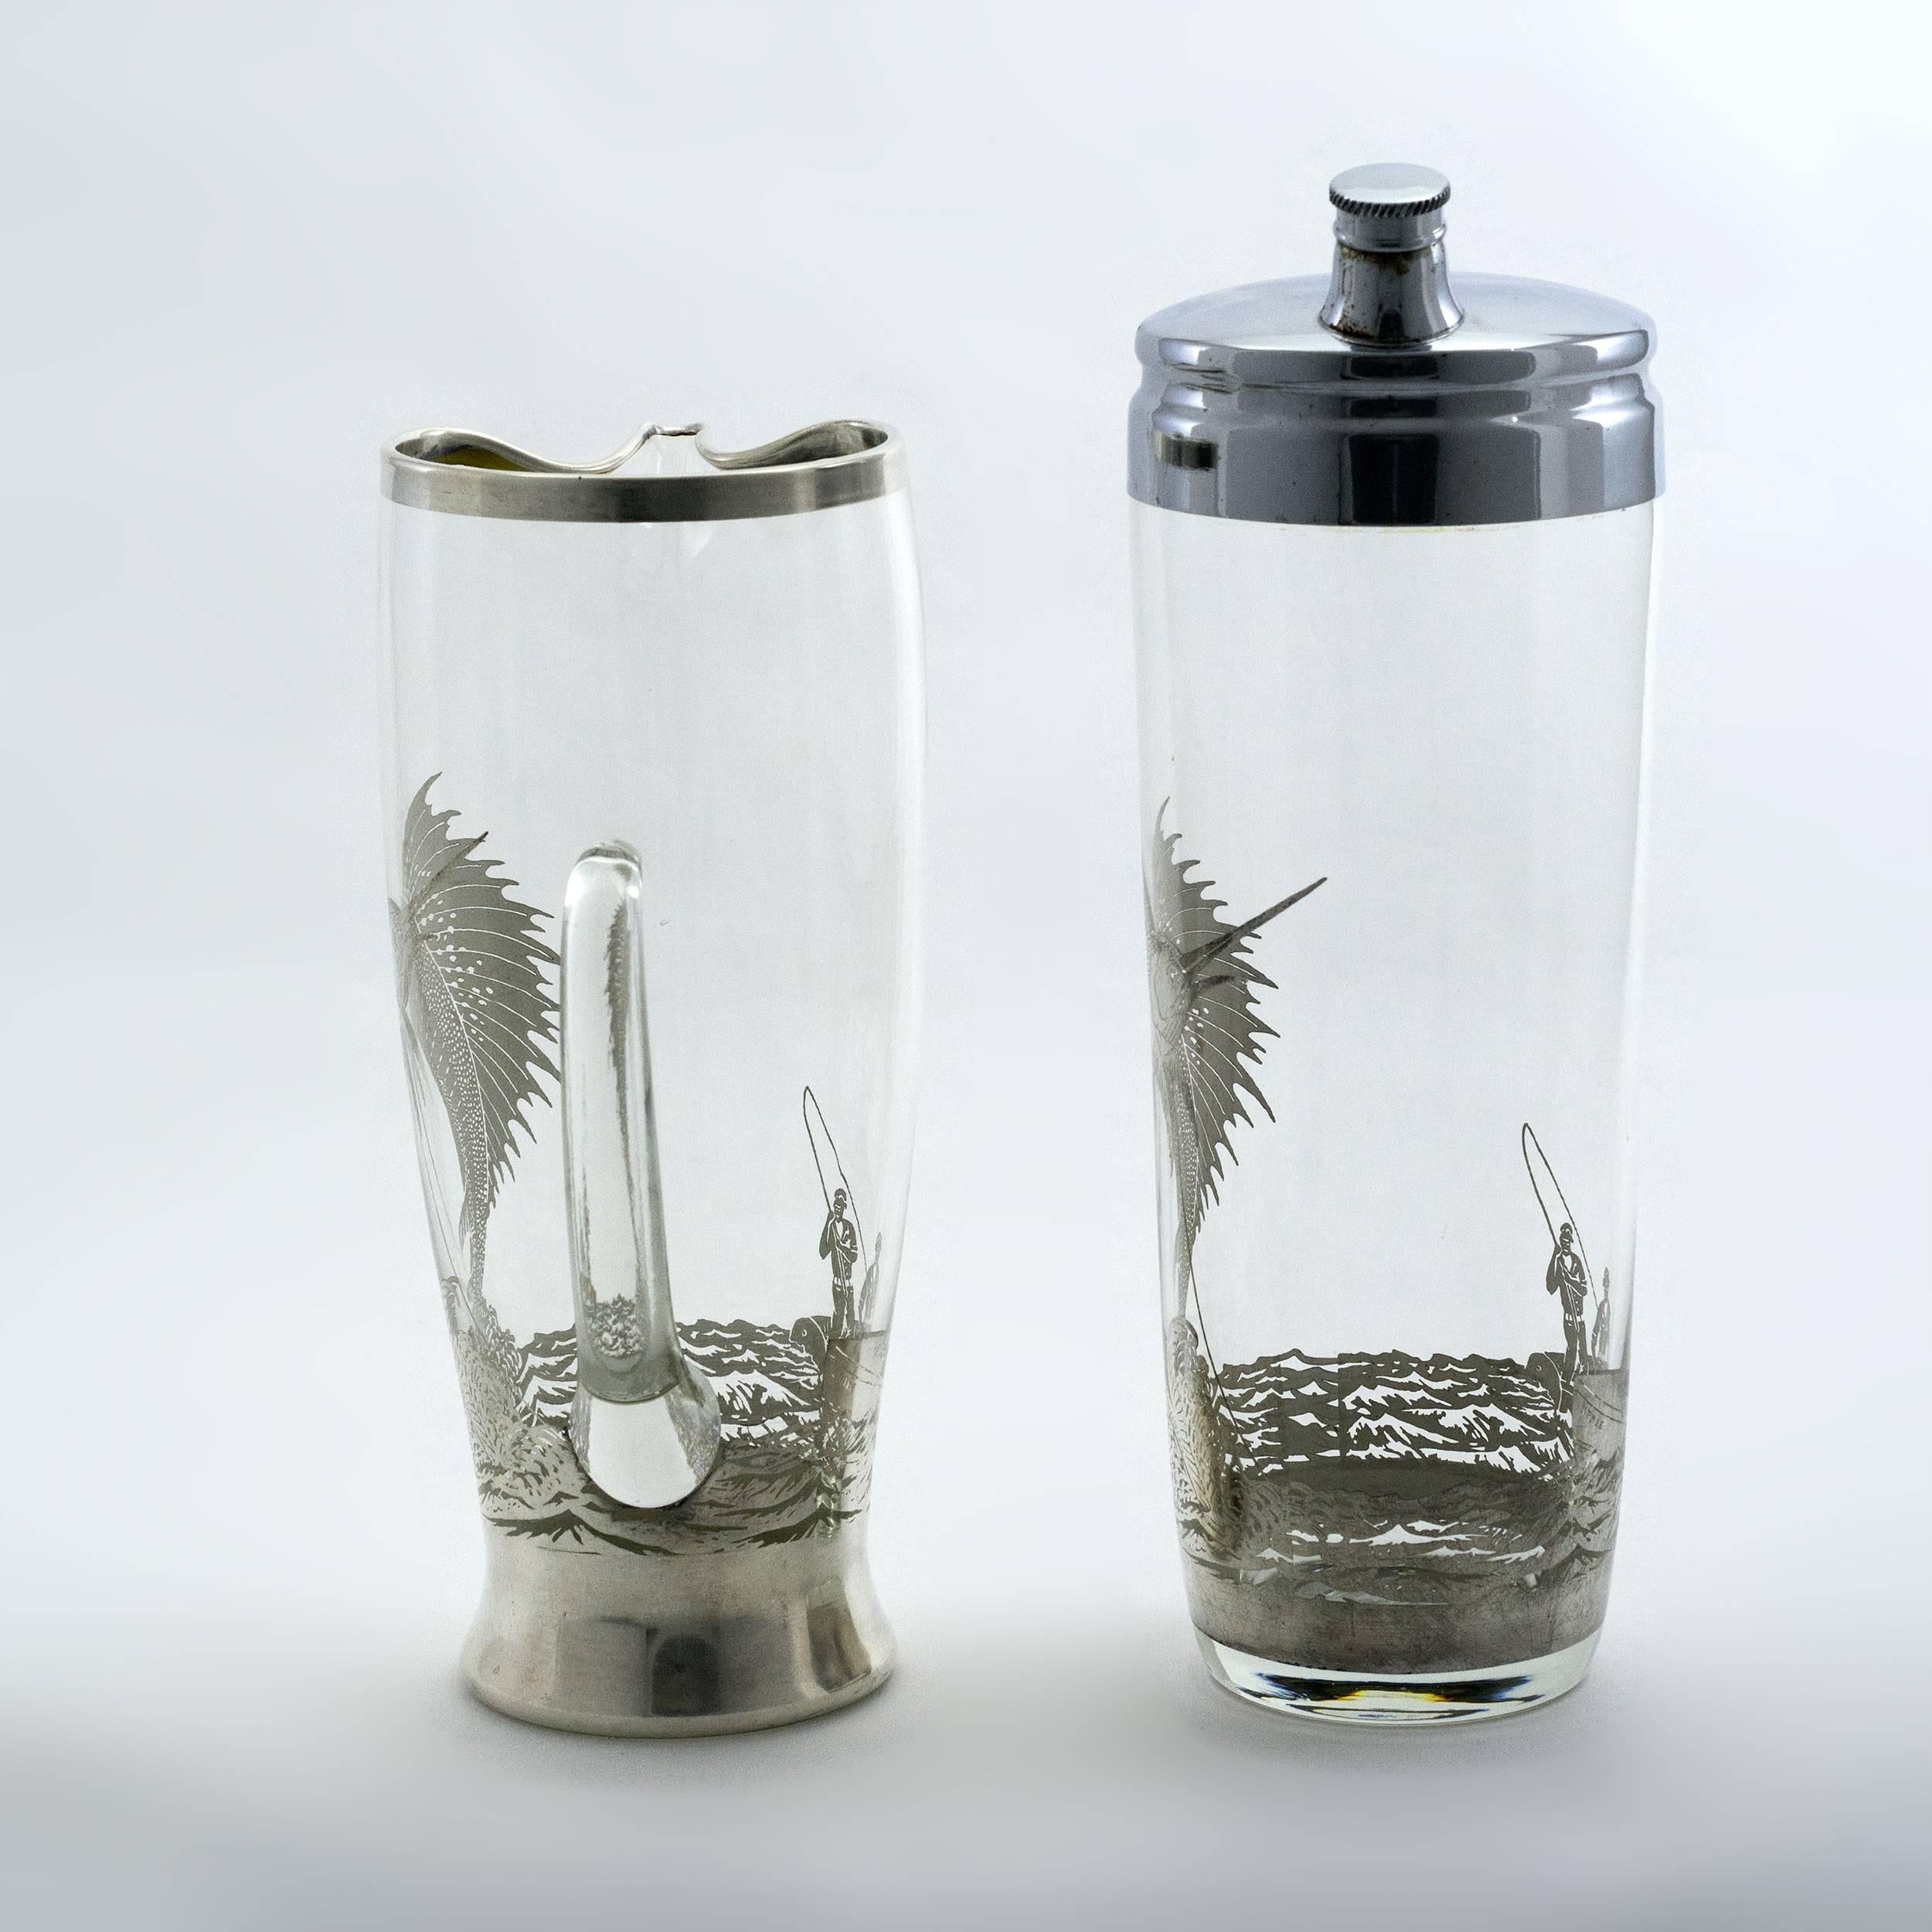 1950s cocktail shaker and pitcher
in clear glass with silver overlay.
Each piece with a large sailfish leaping from 
the waves on the front while the back has a
fishing boat with fishermen. The handled pitcher
has a silver overlay rim with a